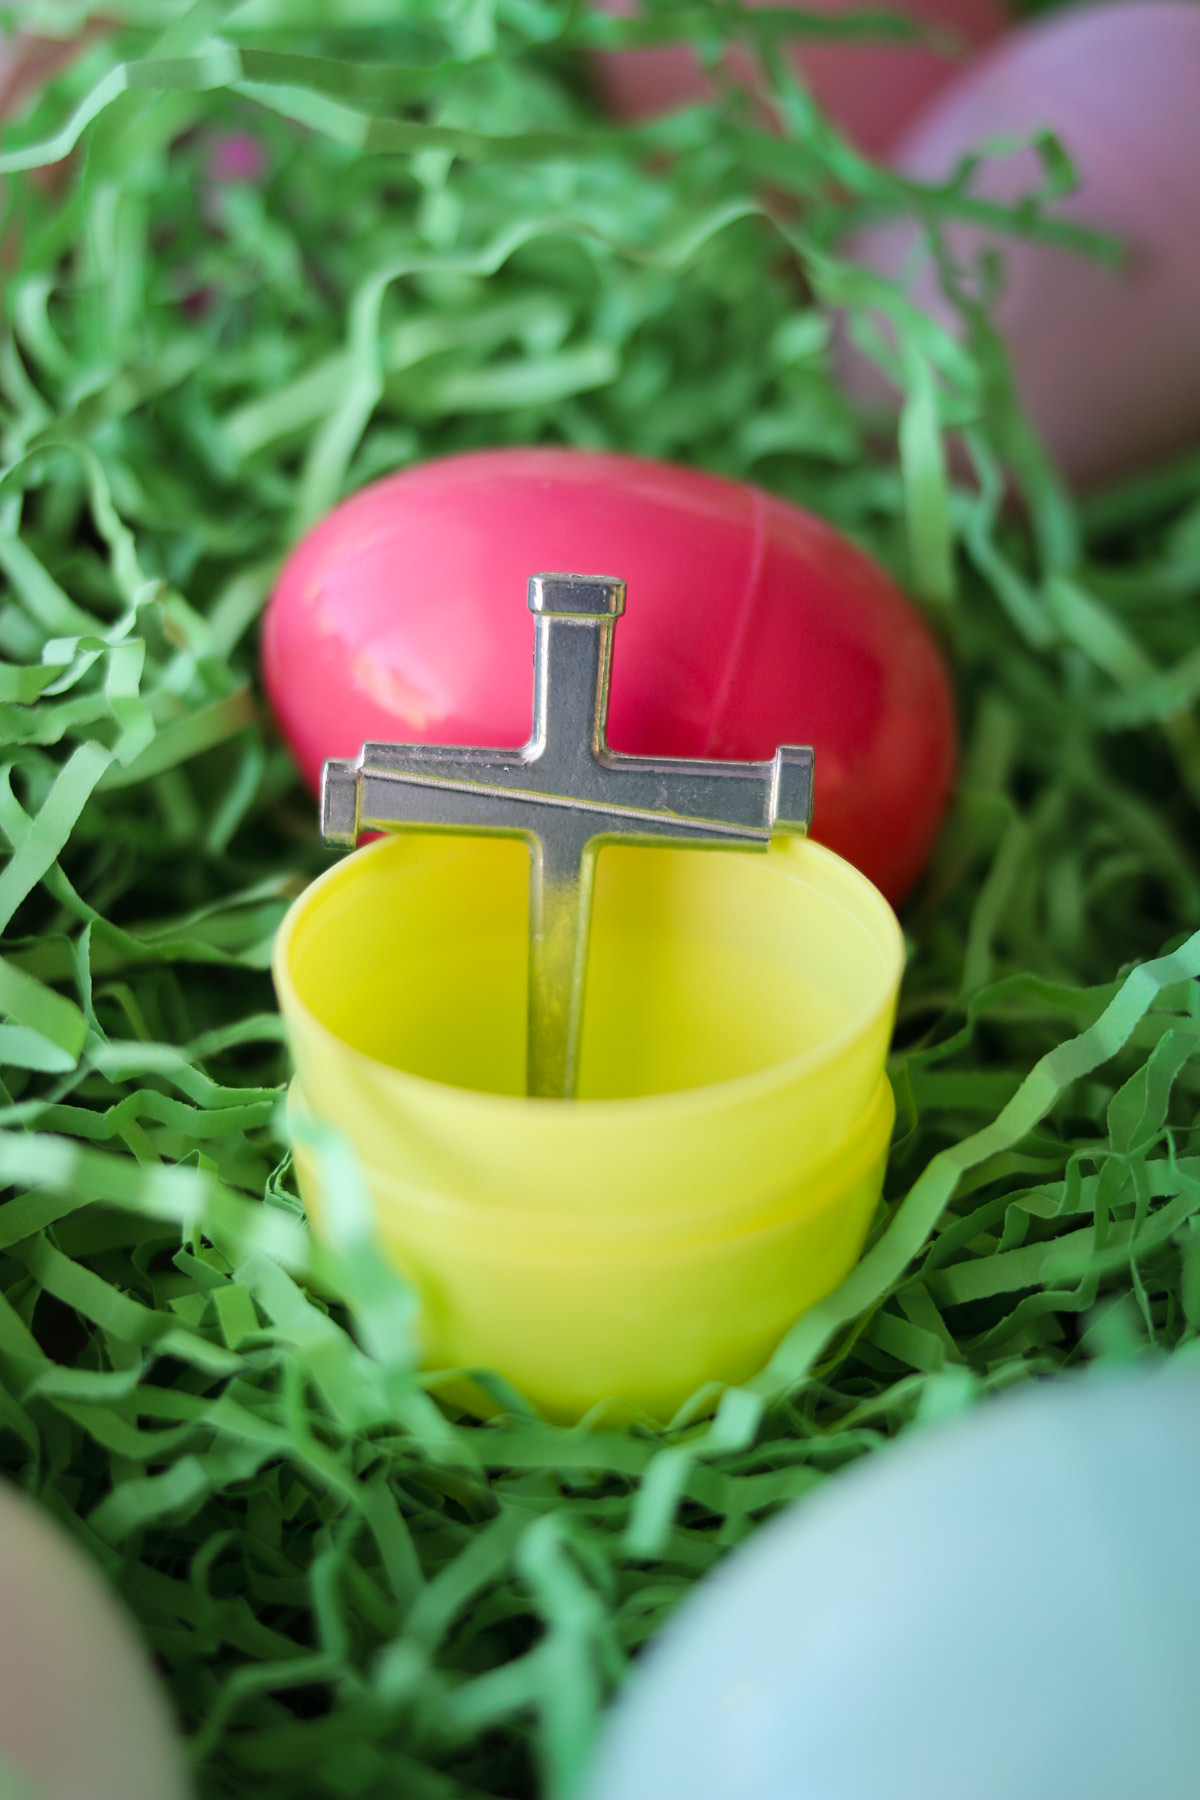 metal cross inside an open yellow plastic easter egg on a bed of grass with other plastic eggs.